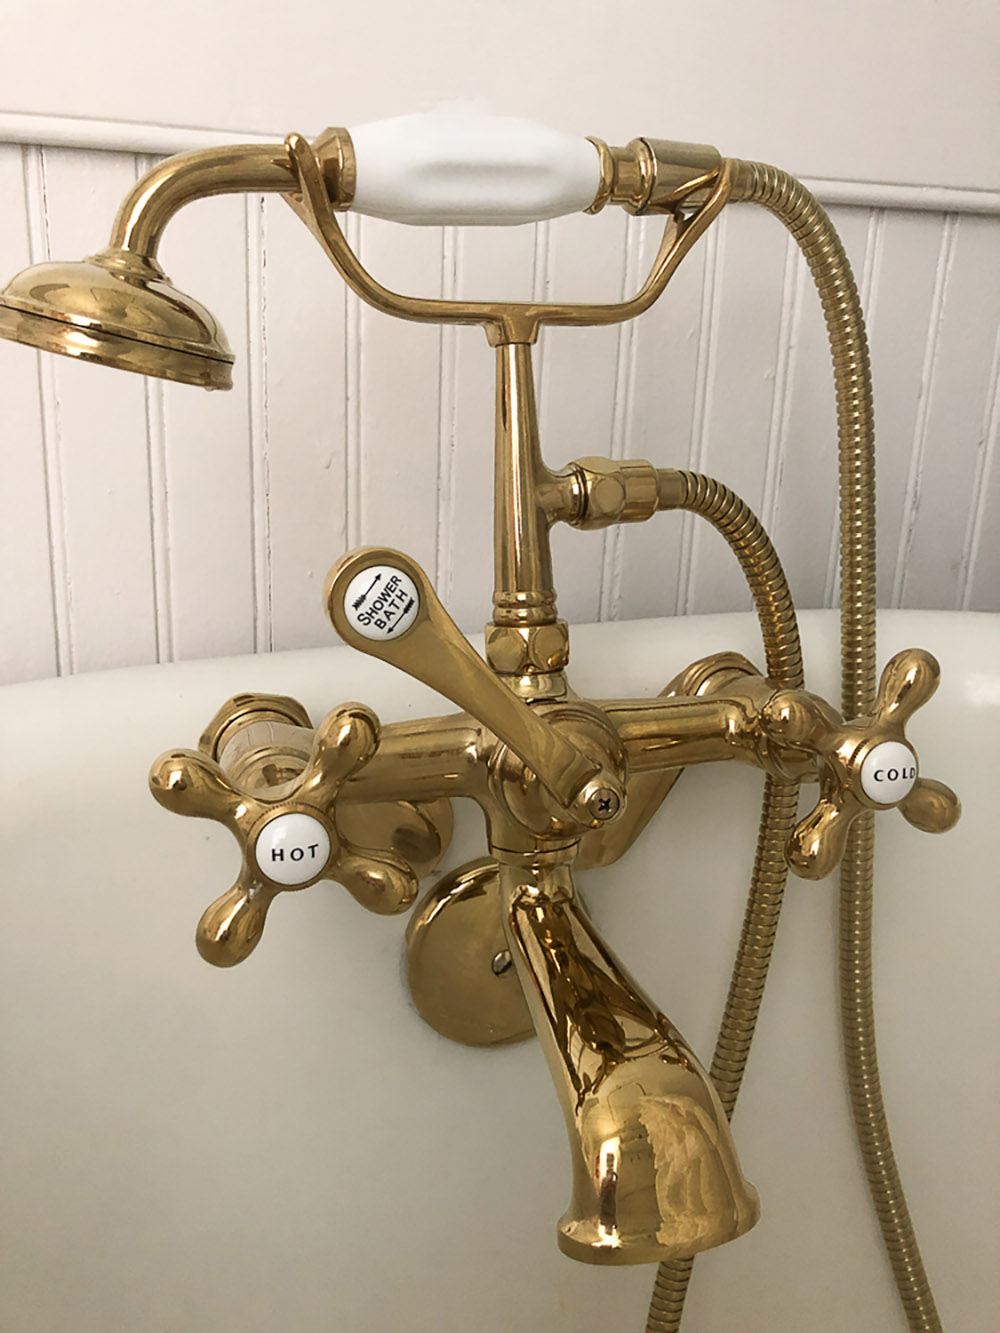 A brass vintage clawfoot tub faucet with a hand shower.